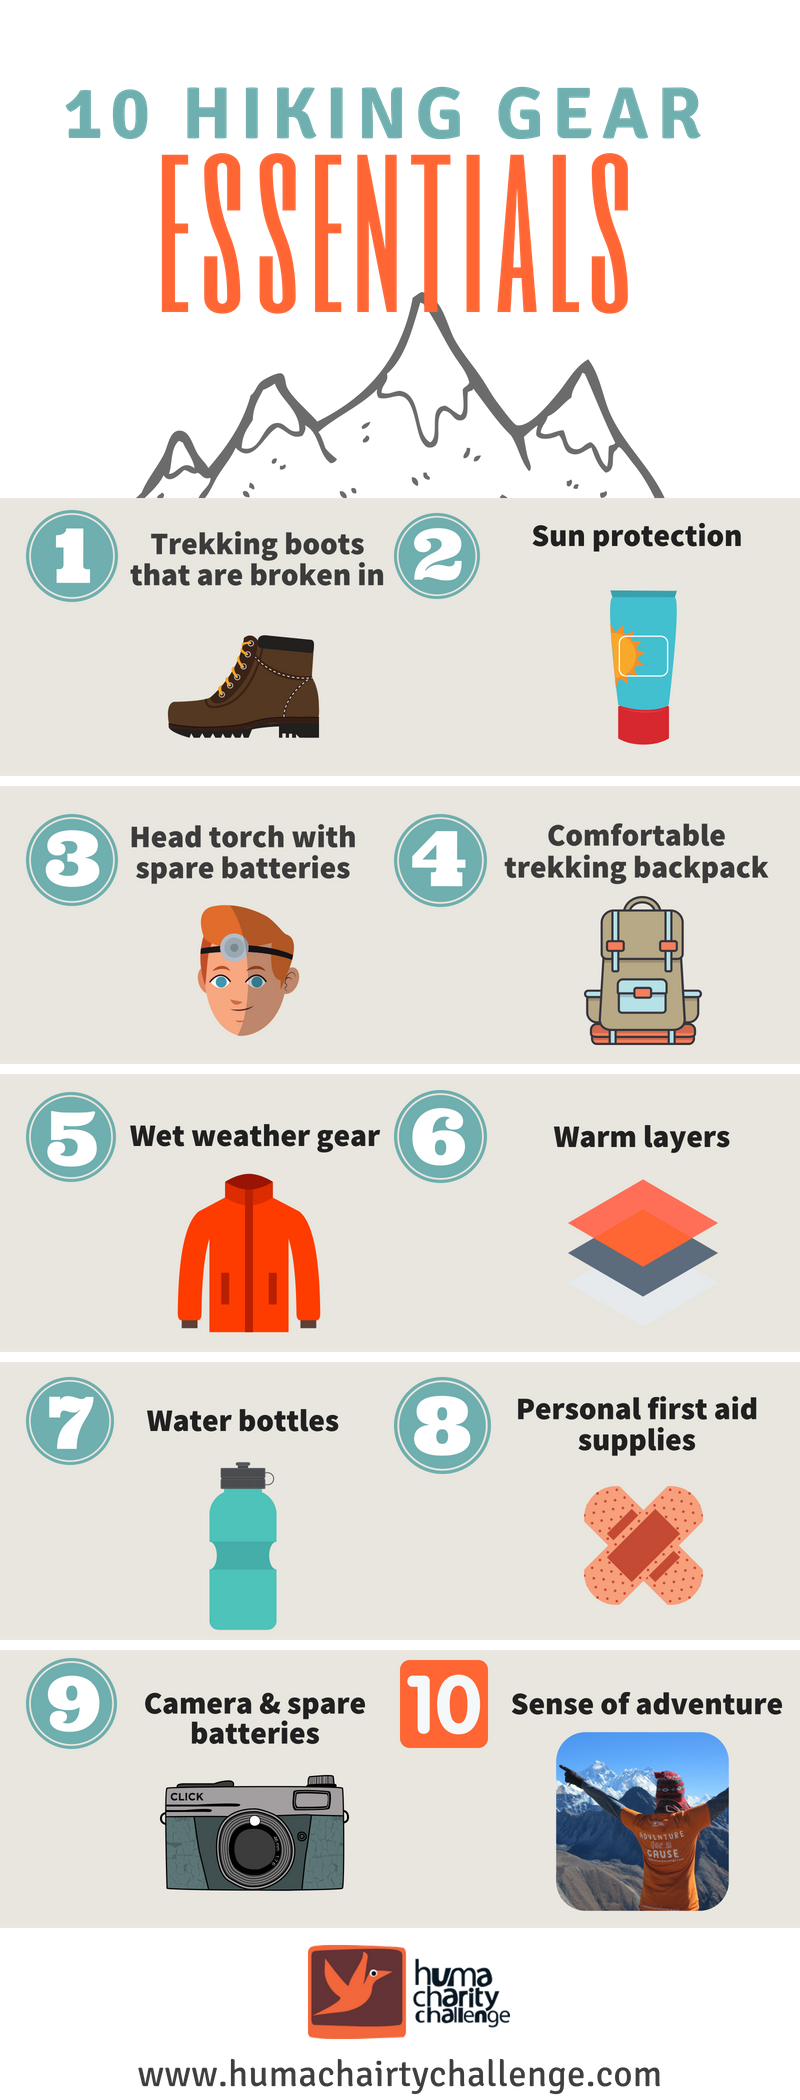 What to Pack: 10 Hiking Gear Essentials